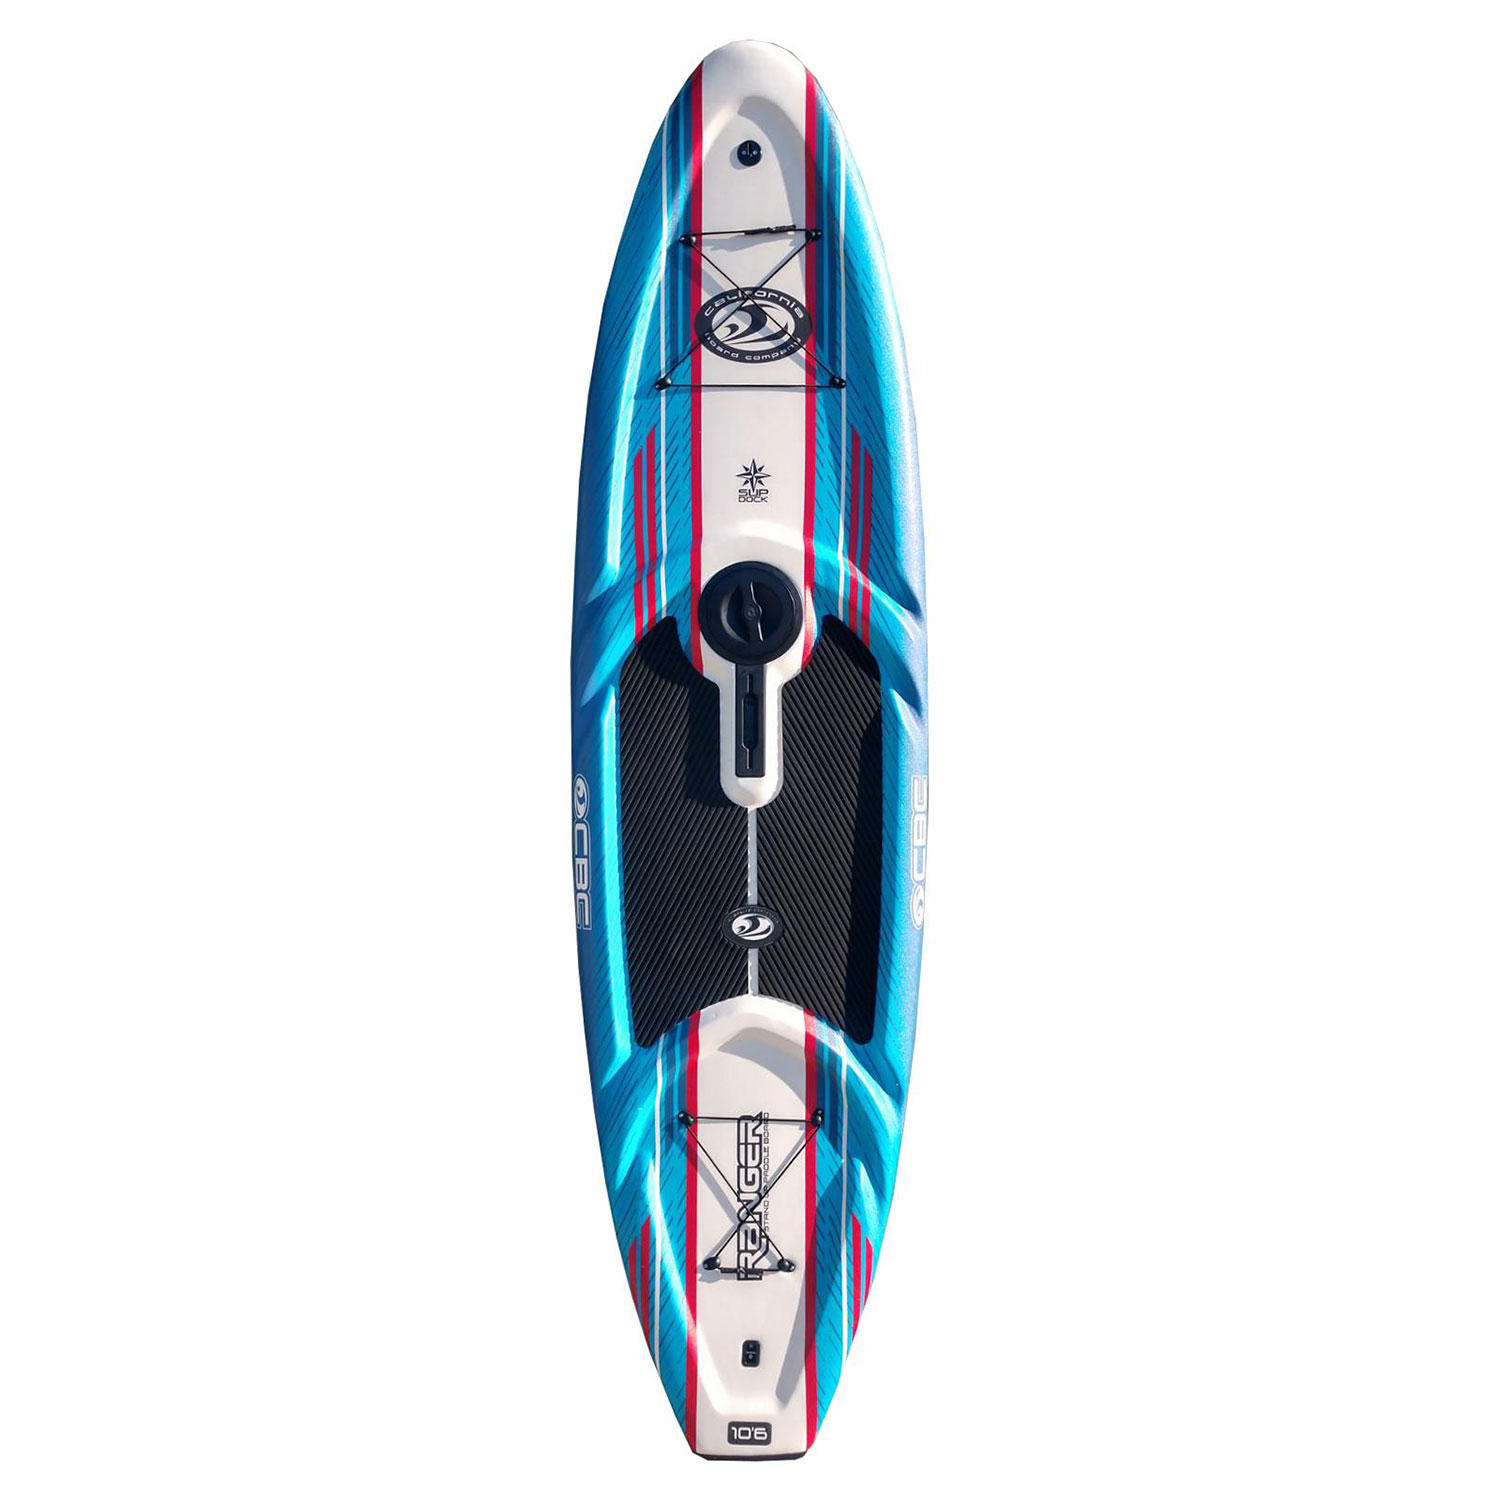 CBC 10’6 Ranger Stand Up Paddleboard Package